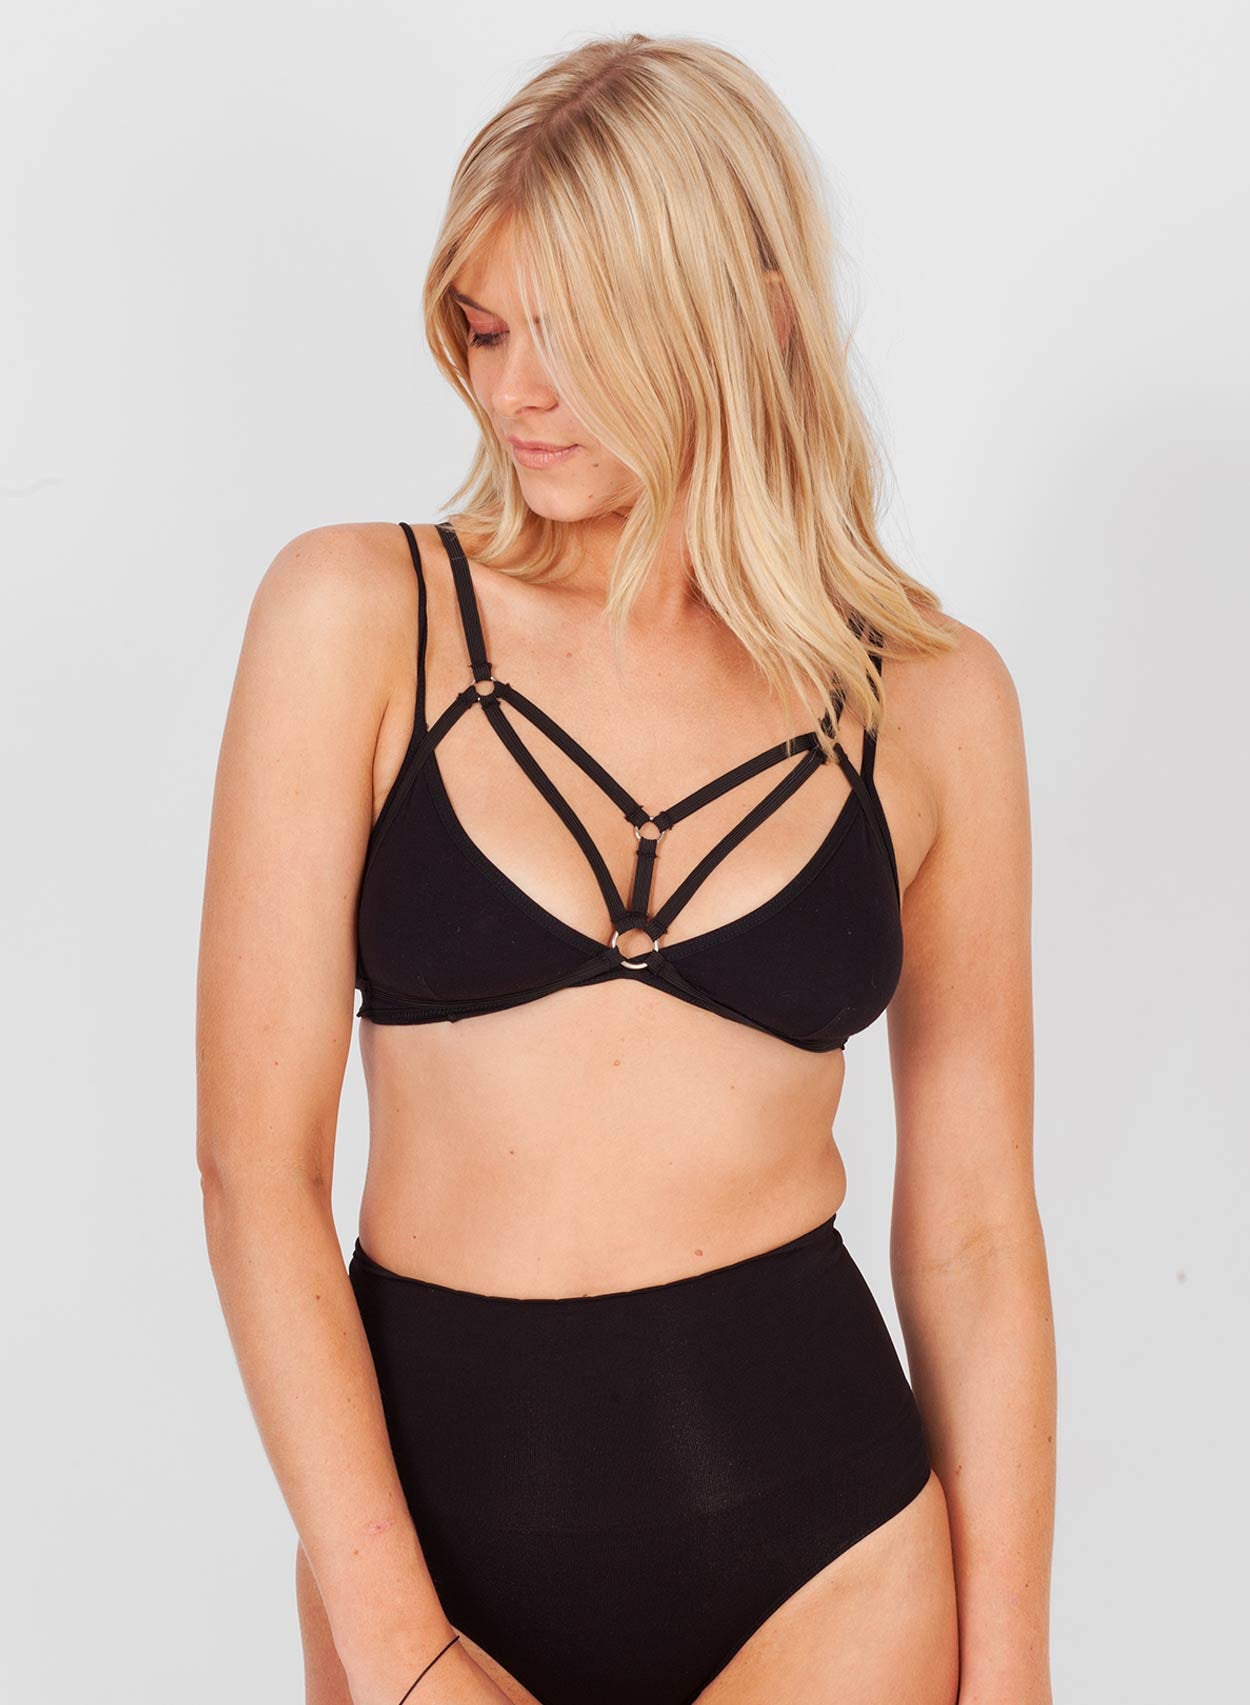 Love Misia Harness - LoveClothing.com - 3